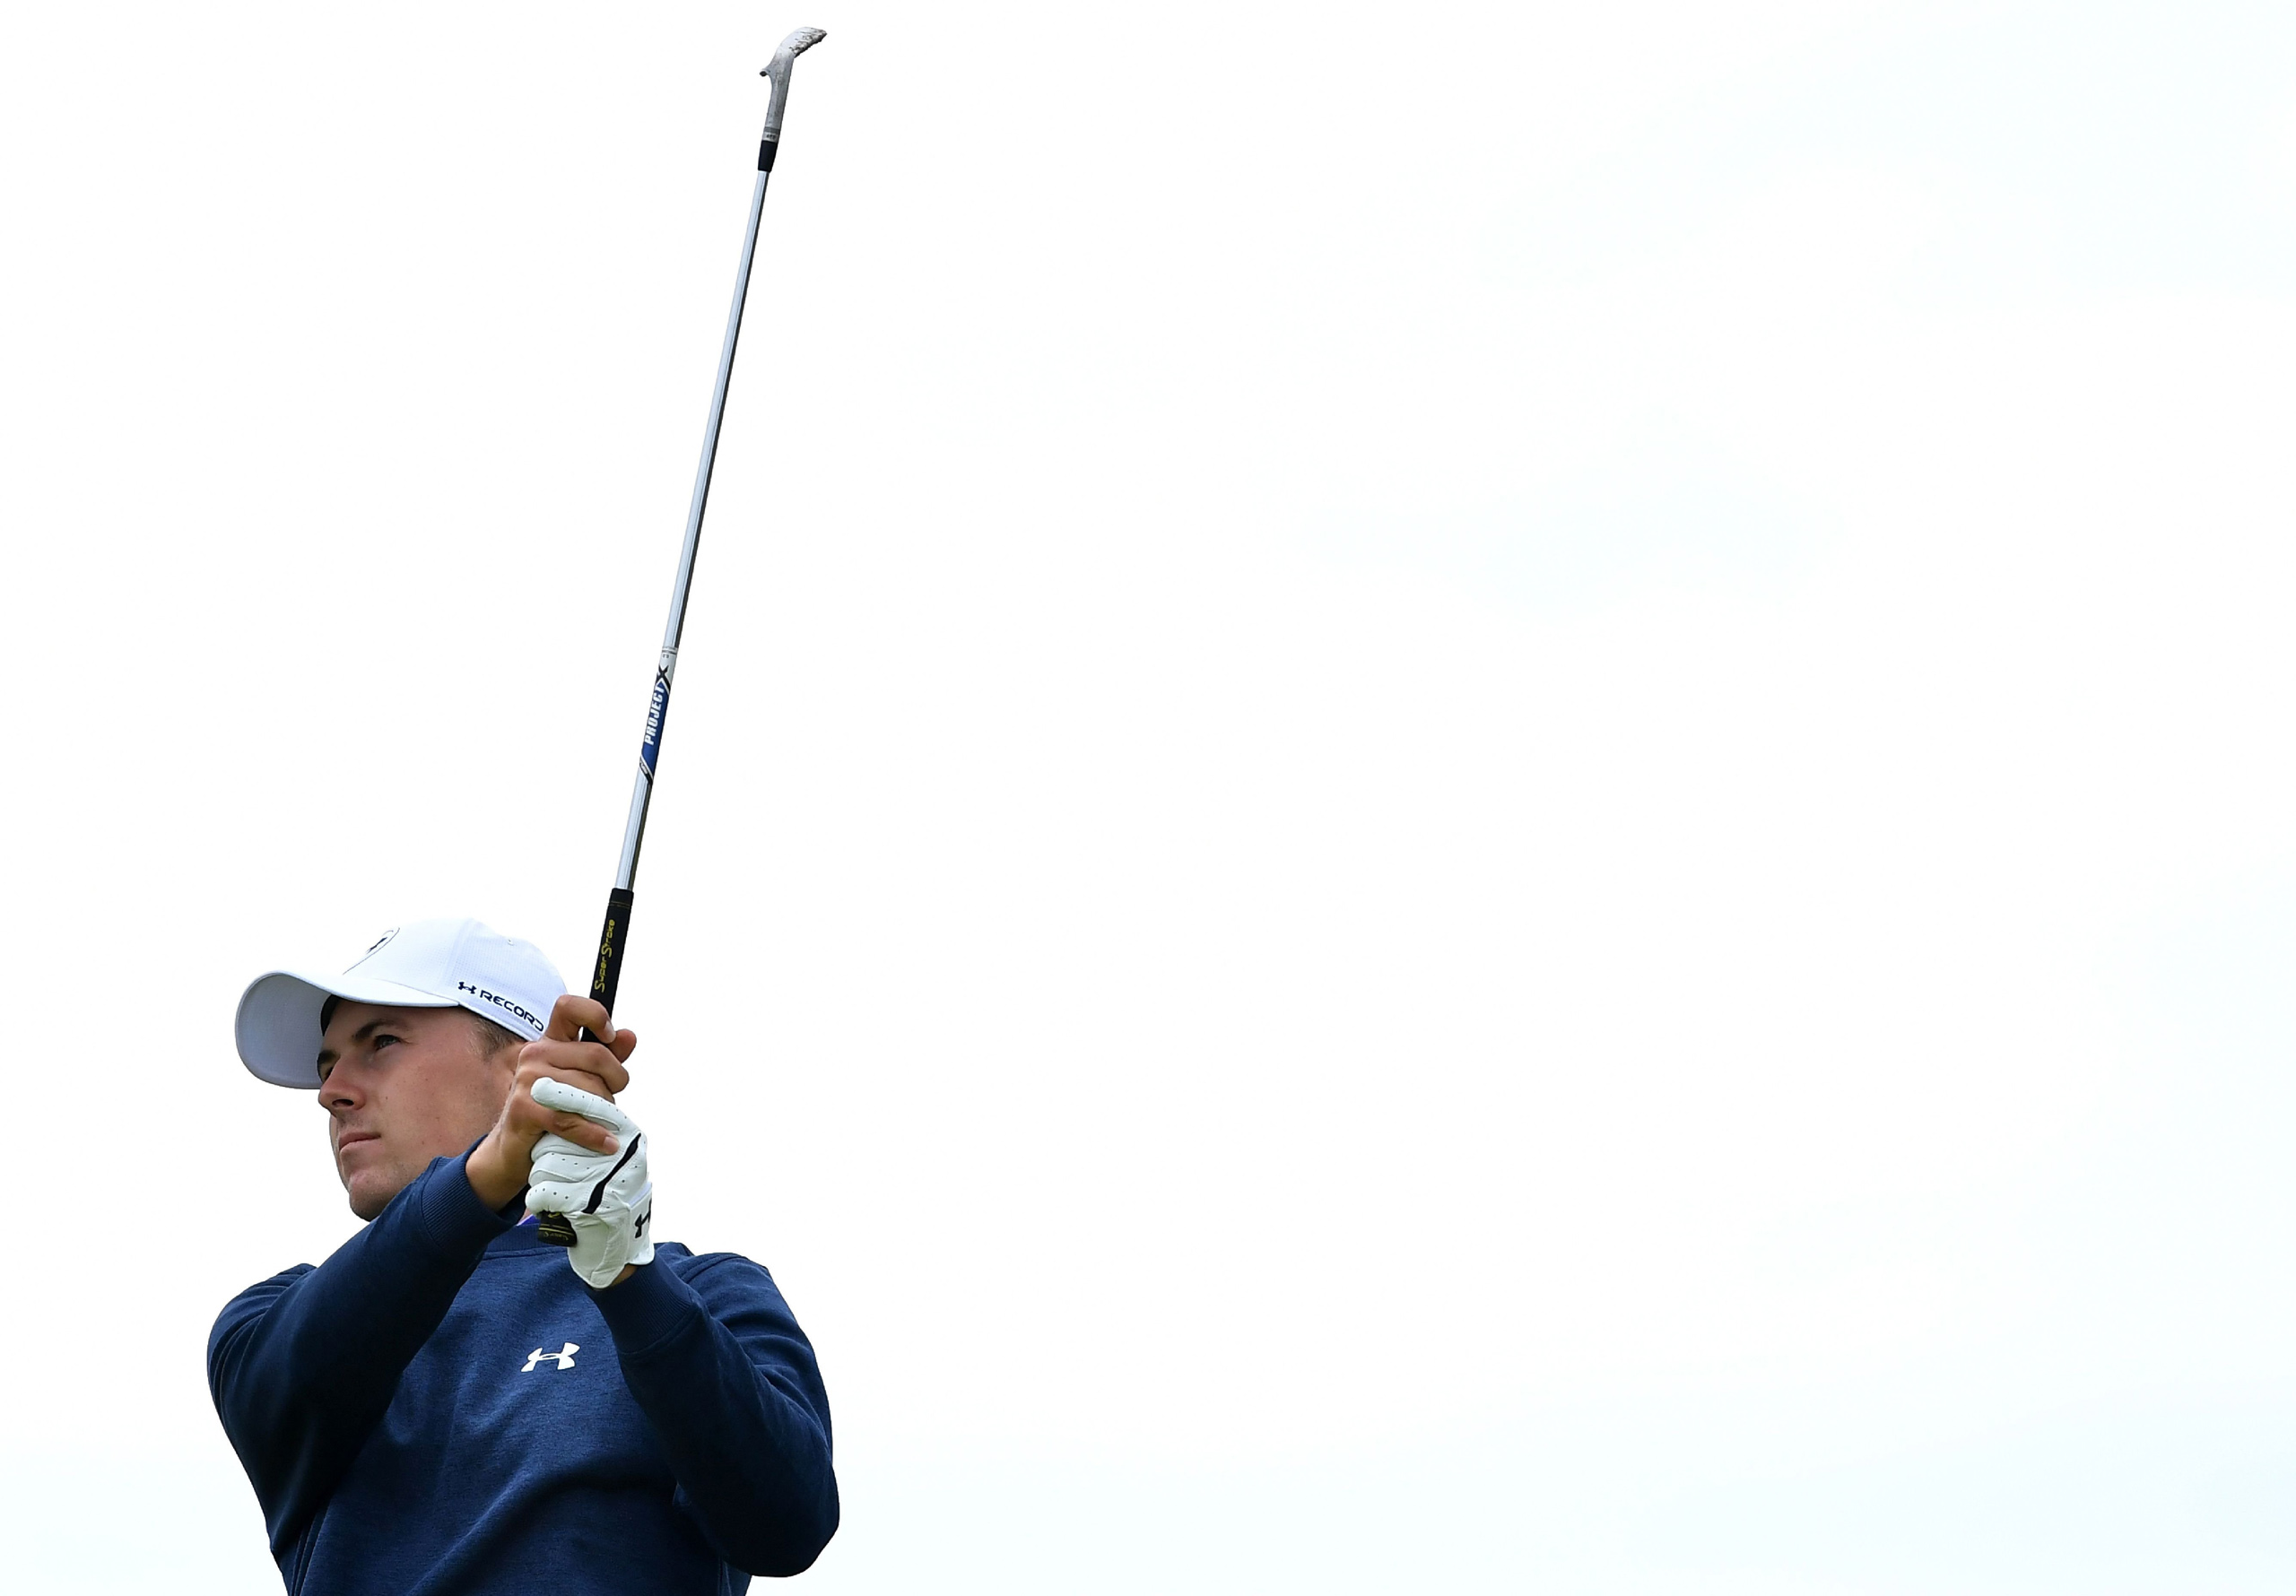 US golfer Jordan Spieth watches his approach shot on the 3rd hole during practice on July 11, 2016, ahead of the 2016 British Open Golf Championship at Royal Troon in Scotland.
                      The 2016 British Open begins on July 14, 2016. World number three Jordan Spieth became the latest leading golfer to decide not to play at the Olympics next month in Rio de Janeiro, the International Golf Federation president Peter Dawson announced Monday. / AFP PHOTO / BEN STANSALL / RESTRICTED TO EDITORIAL USEBEN STANSALL/AFP/Getty Images (BEN STANSALL&mdash;AFP/Getty Images)